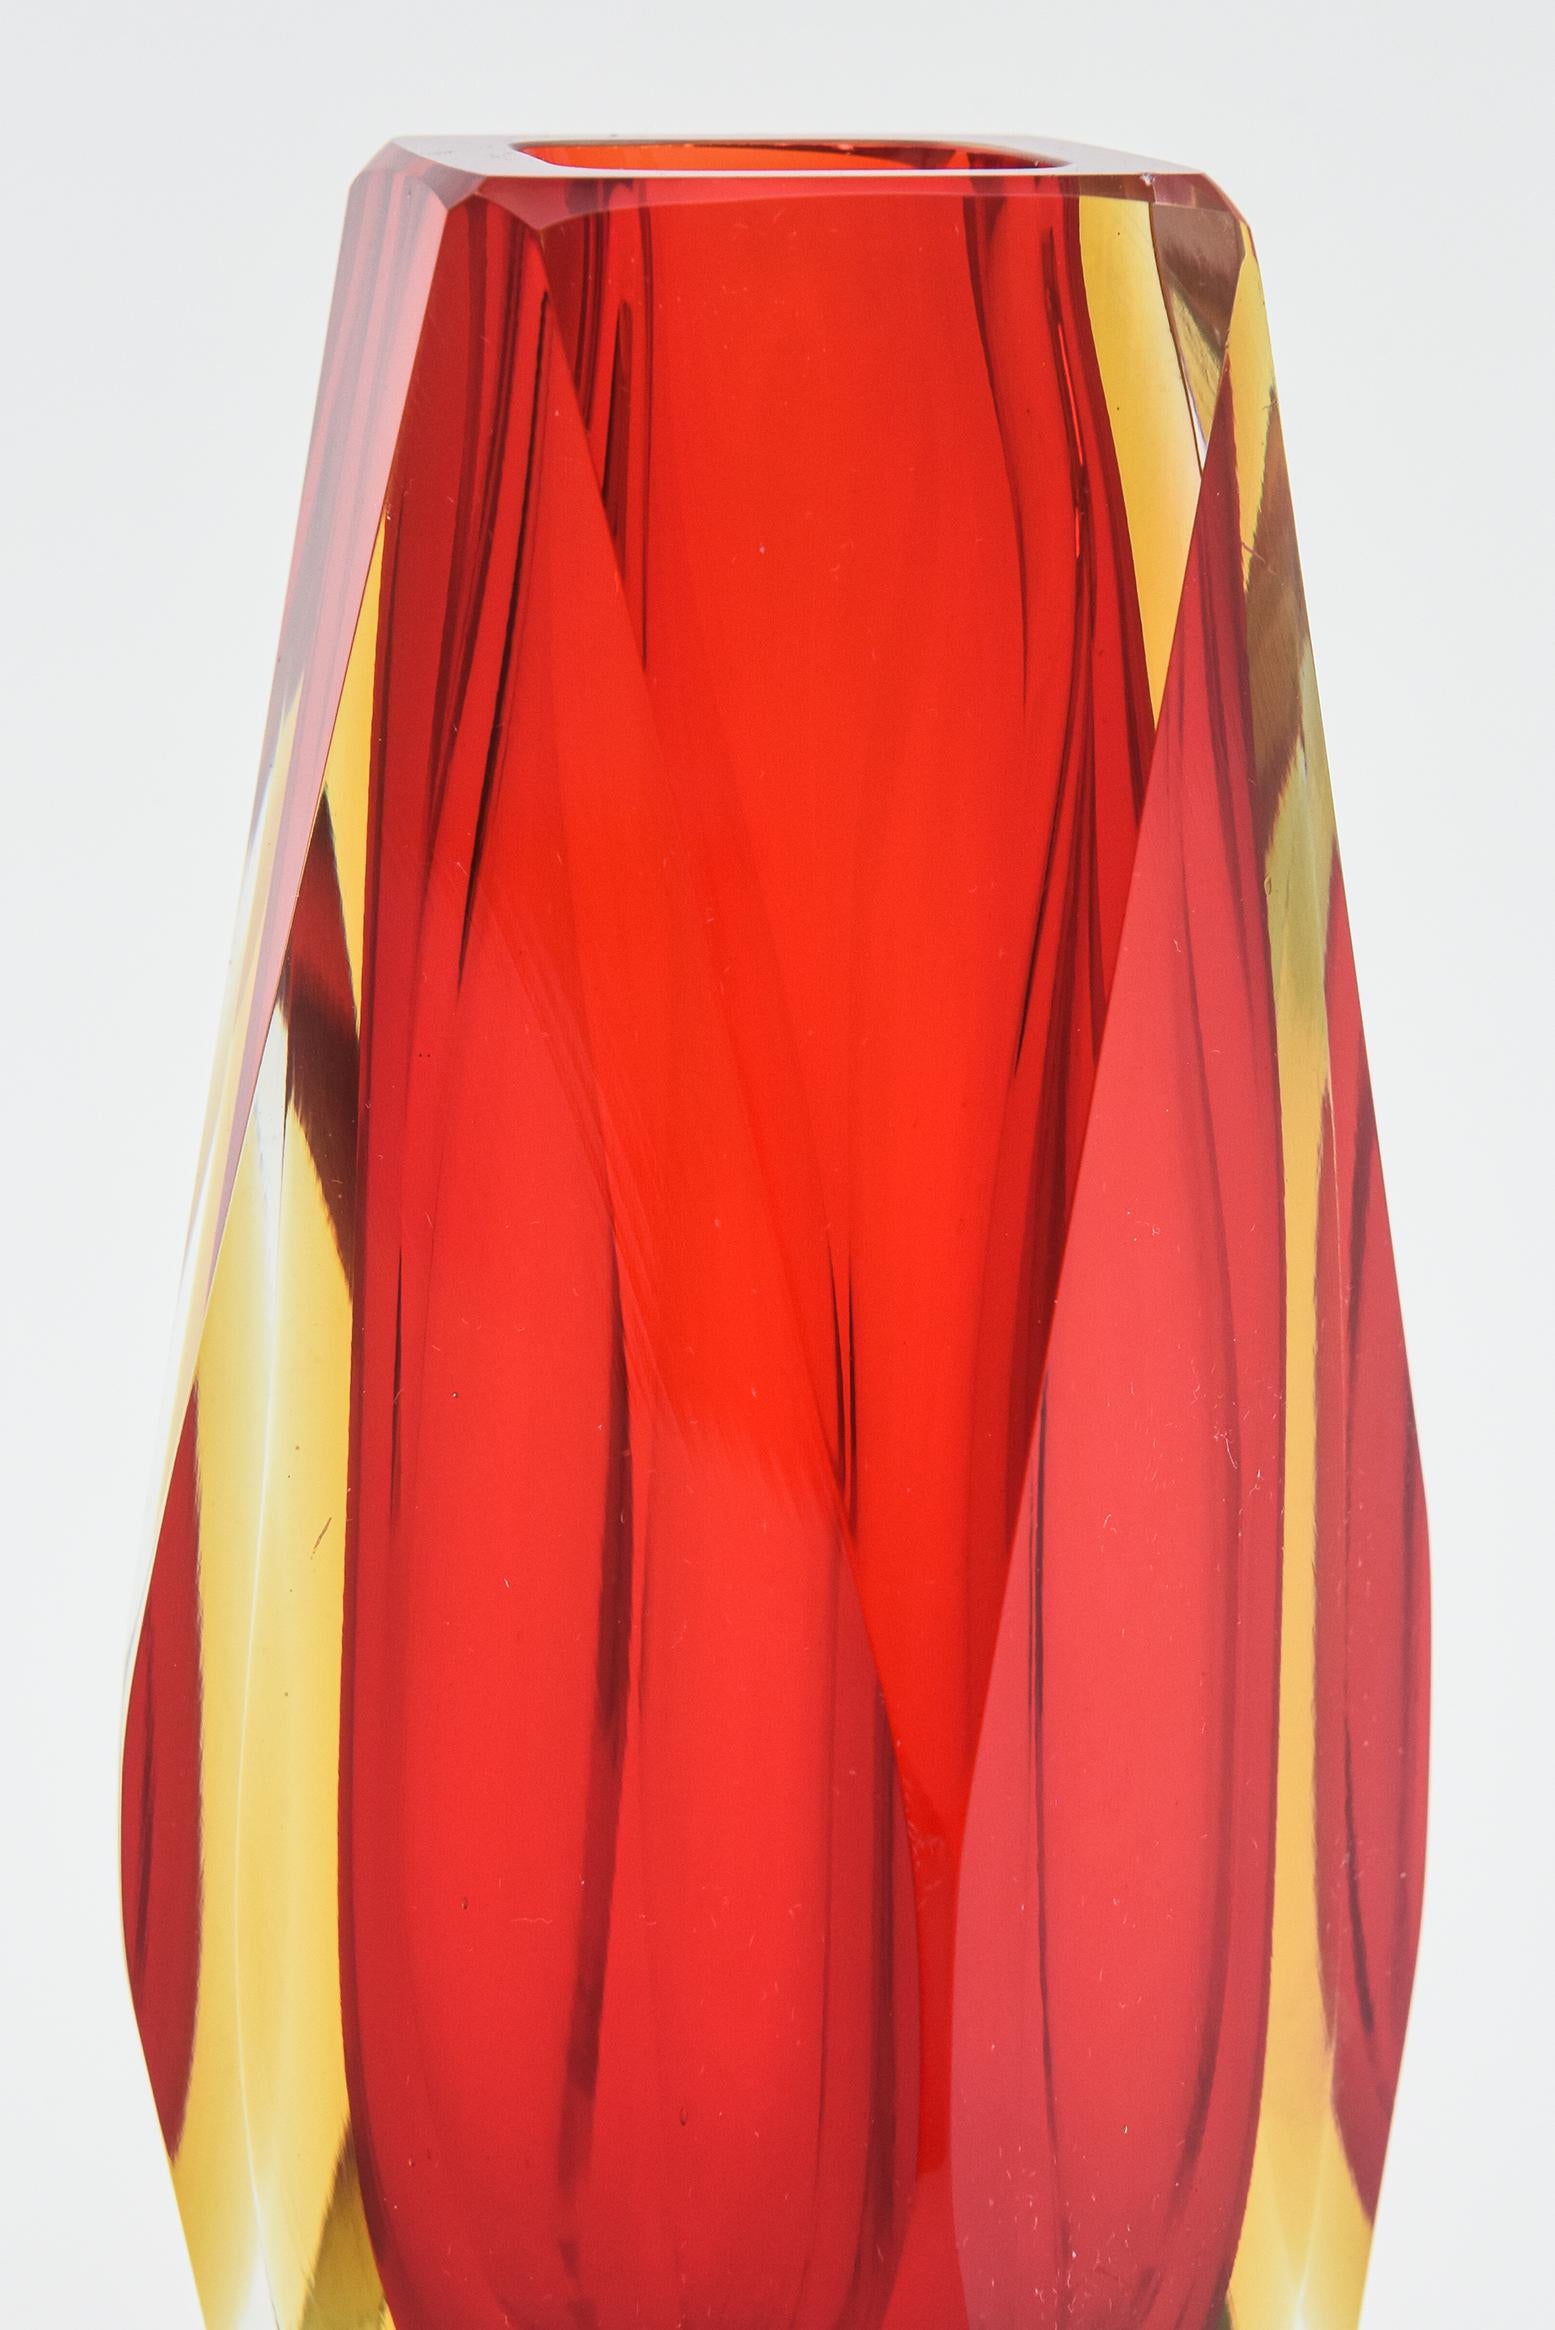 Late 20th Century Mandruzzato Vintage Murano Red and Yellow Sommerso Faceted Glass Vase Italian For Sale